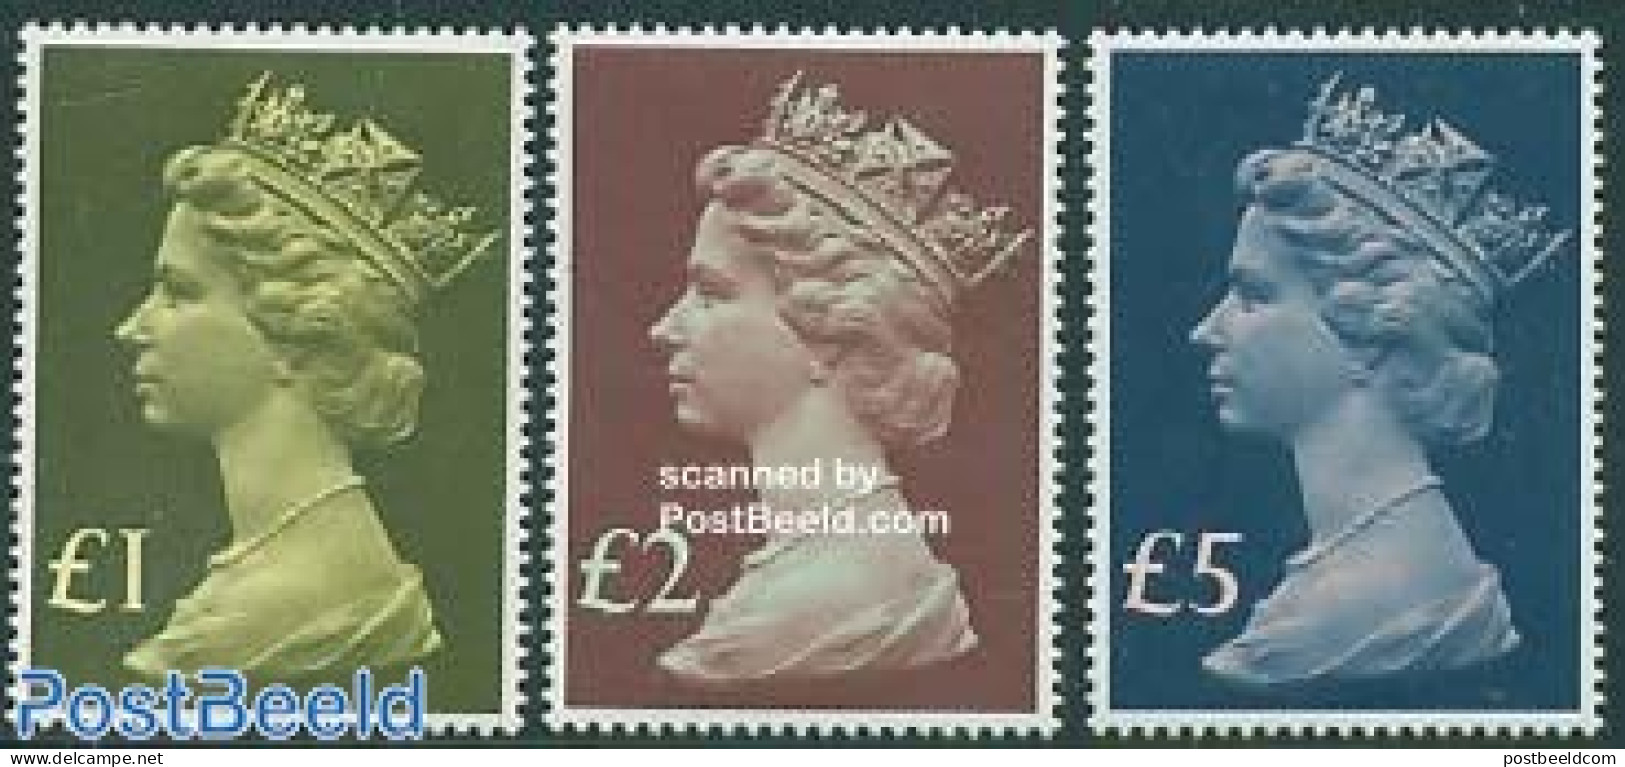 Great Britain 1977 Definitives 3v, Mint NH - Unused Stamps